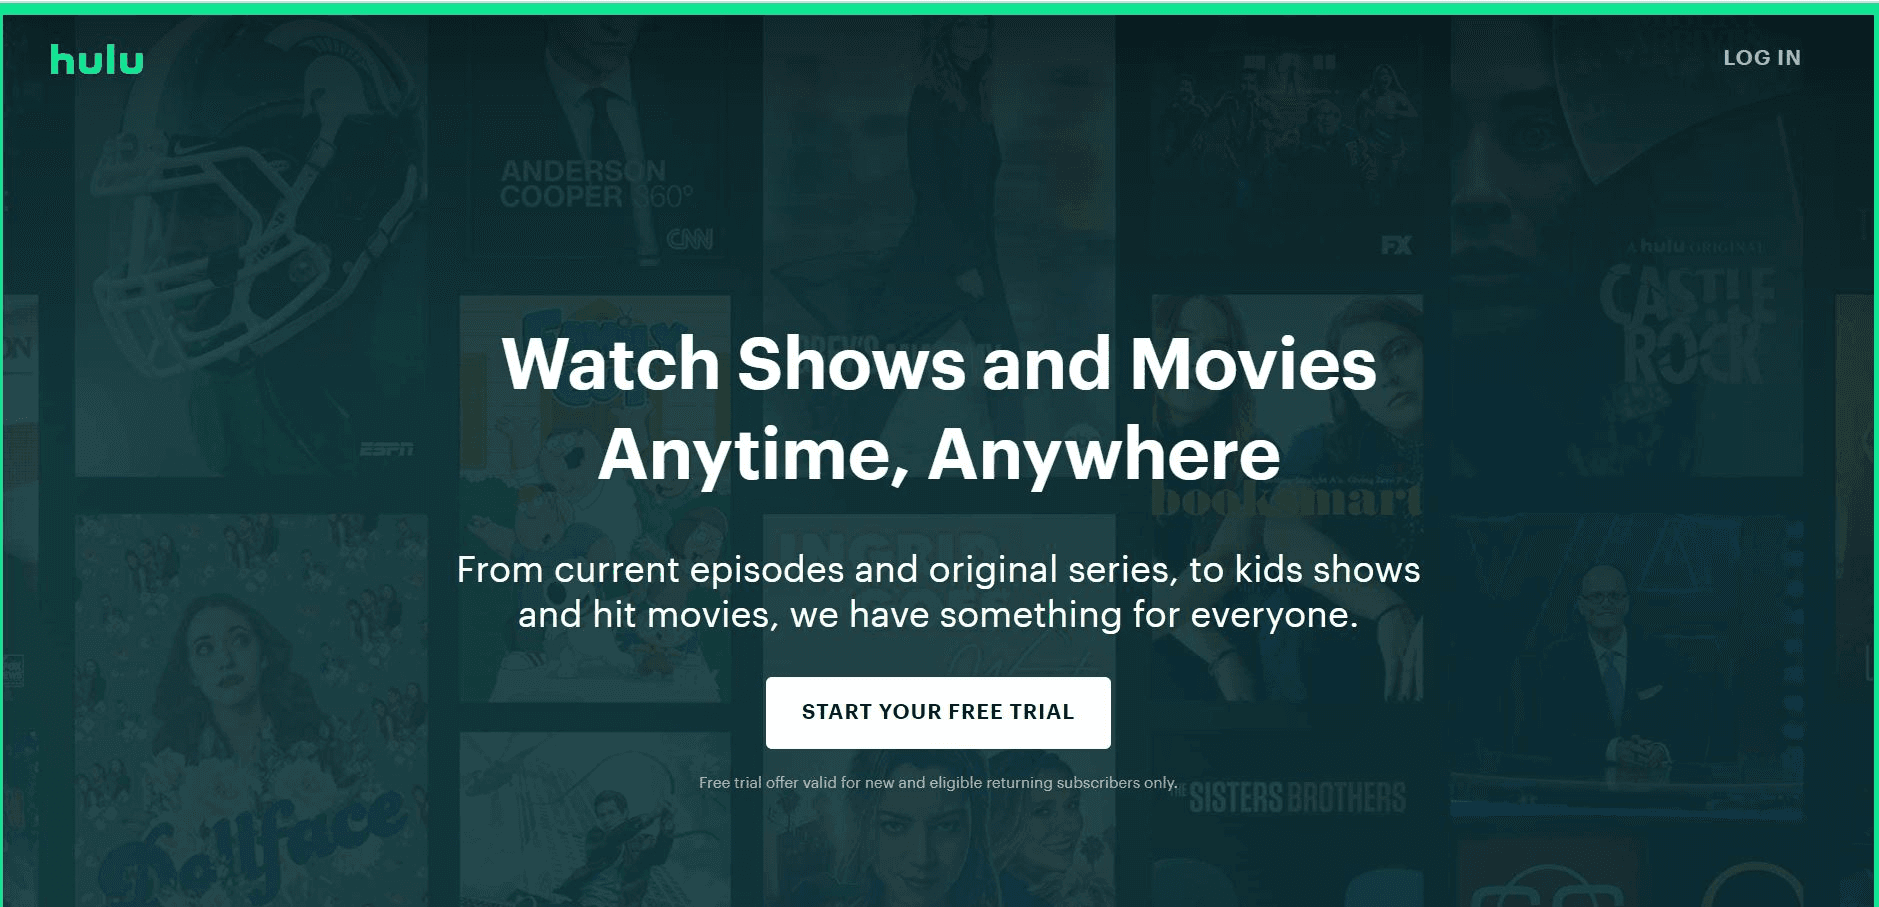 Enjoy your free HBO account today with a Hulu bundle free trial that lets you trial premium accounts on HBO.